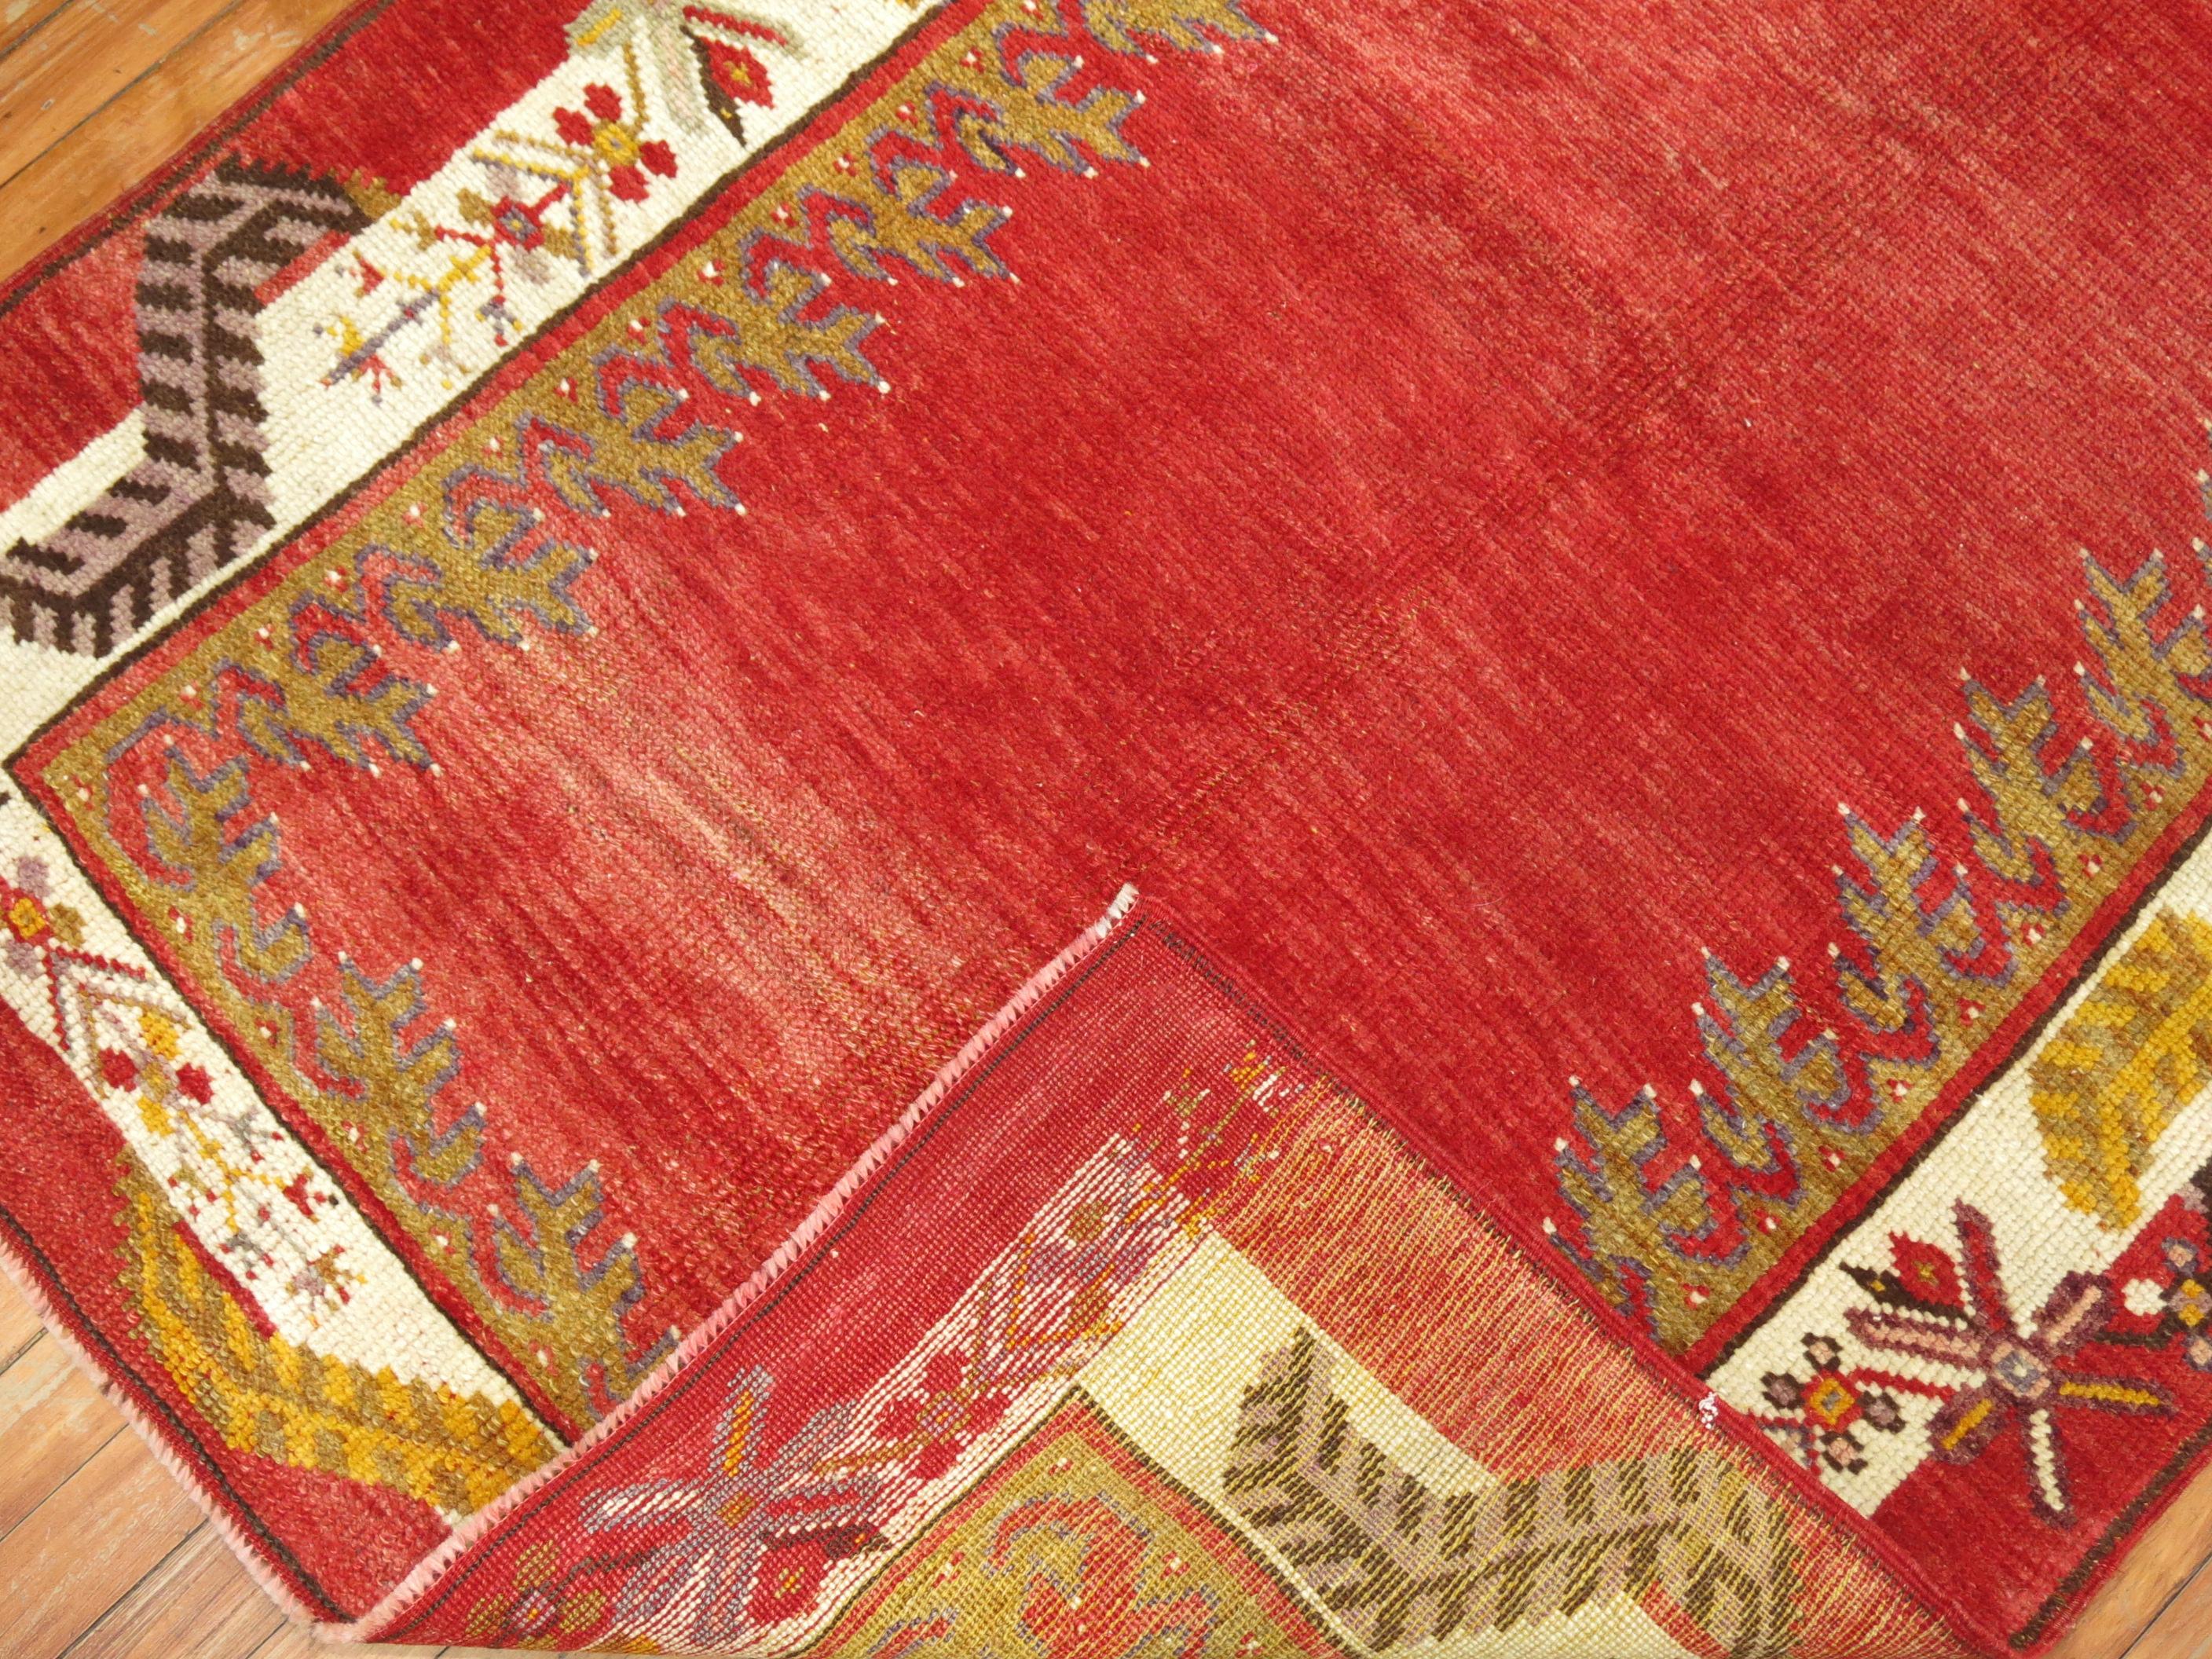 One of a kind vintage Turkish runner with an encased plain design on a red field.